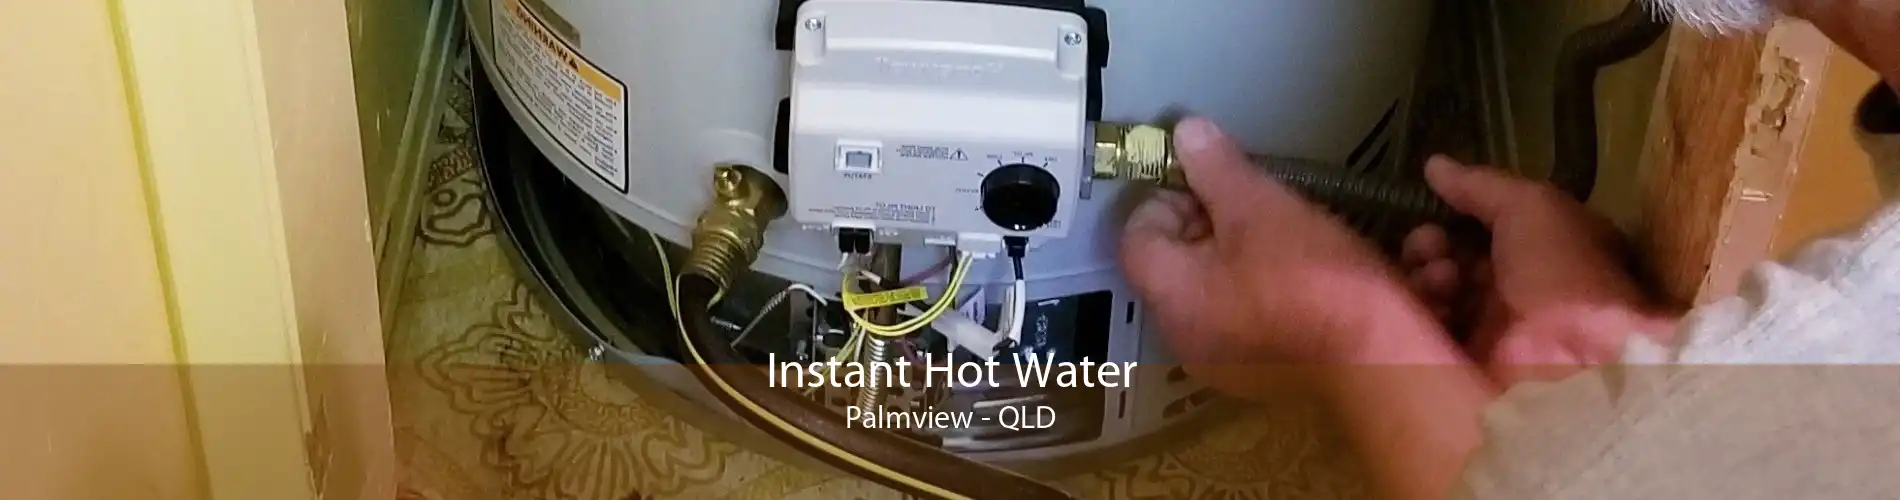 Instant Hot Water Palmview - QLD